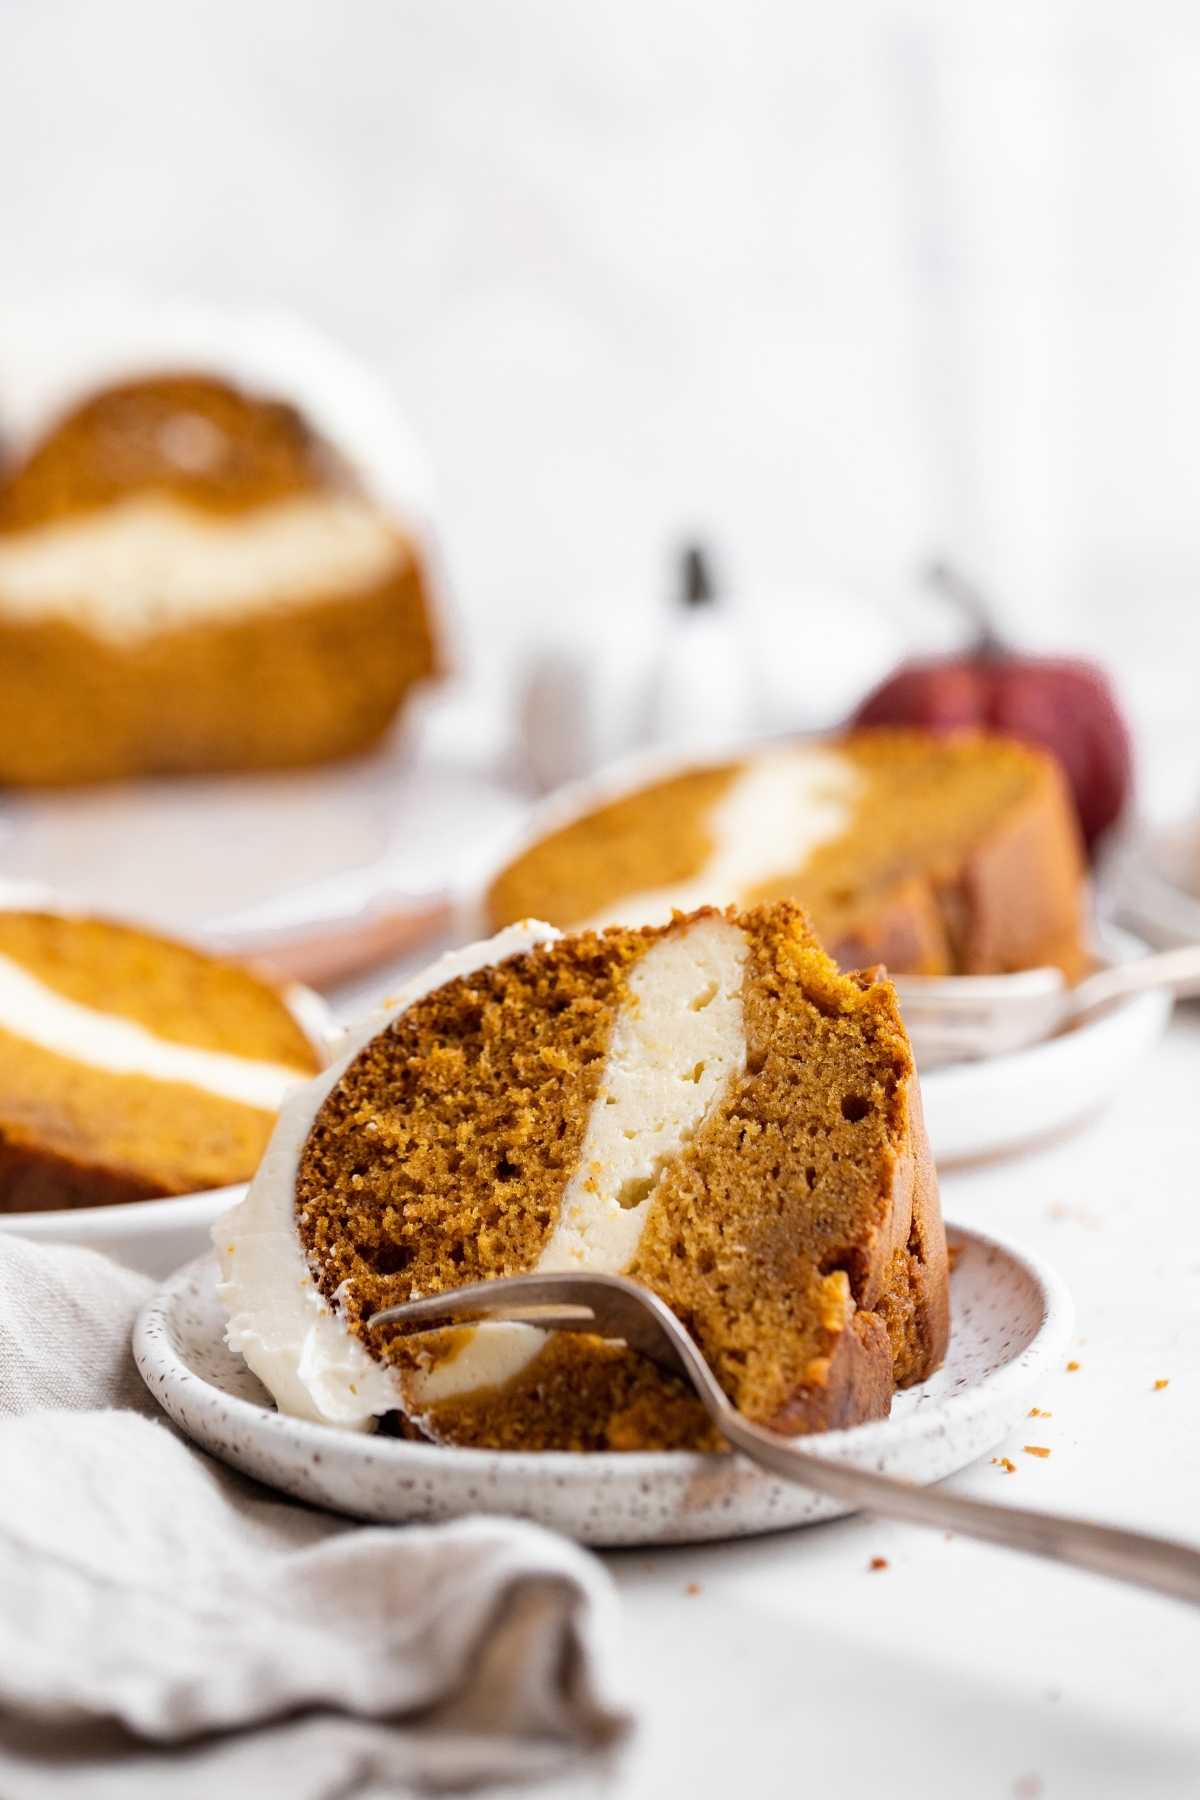 Pumpkin Cheesecake Bundt Cake slices on separate plates with fork taking bite out